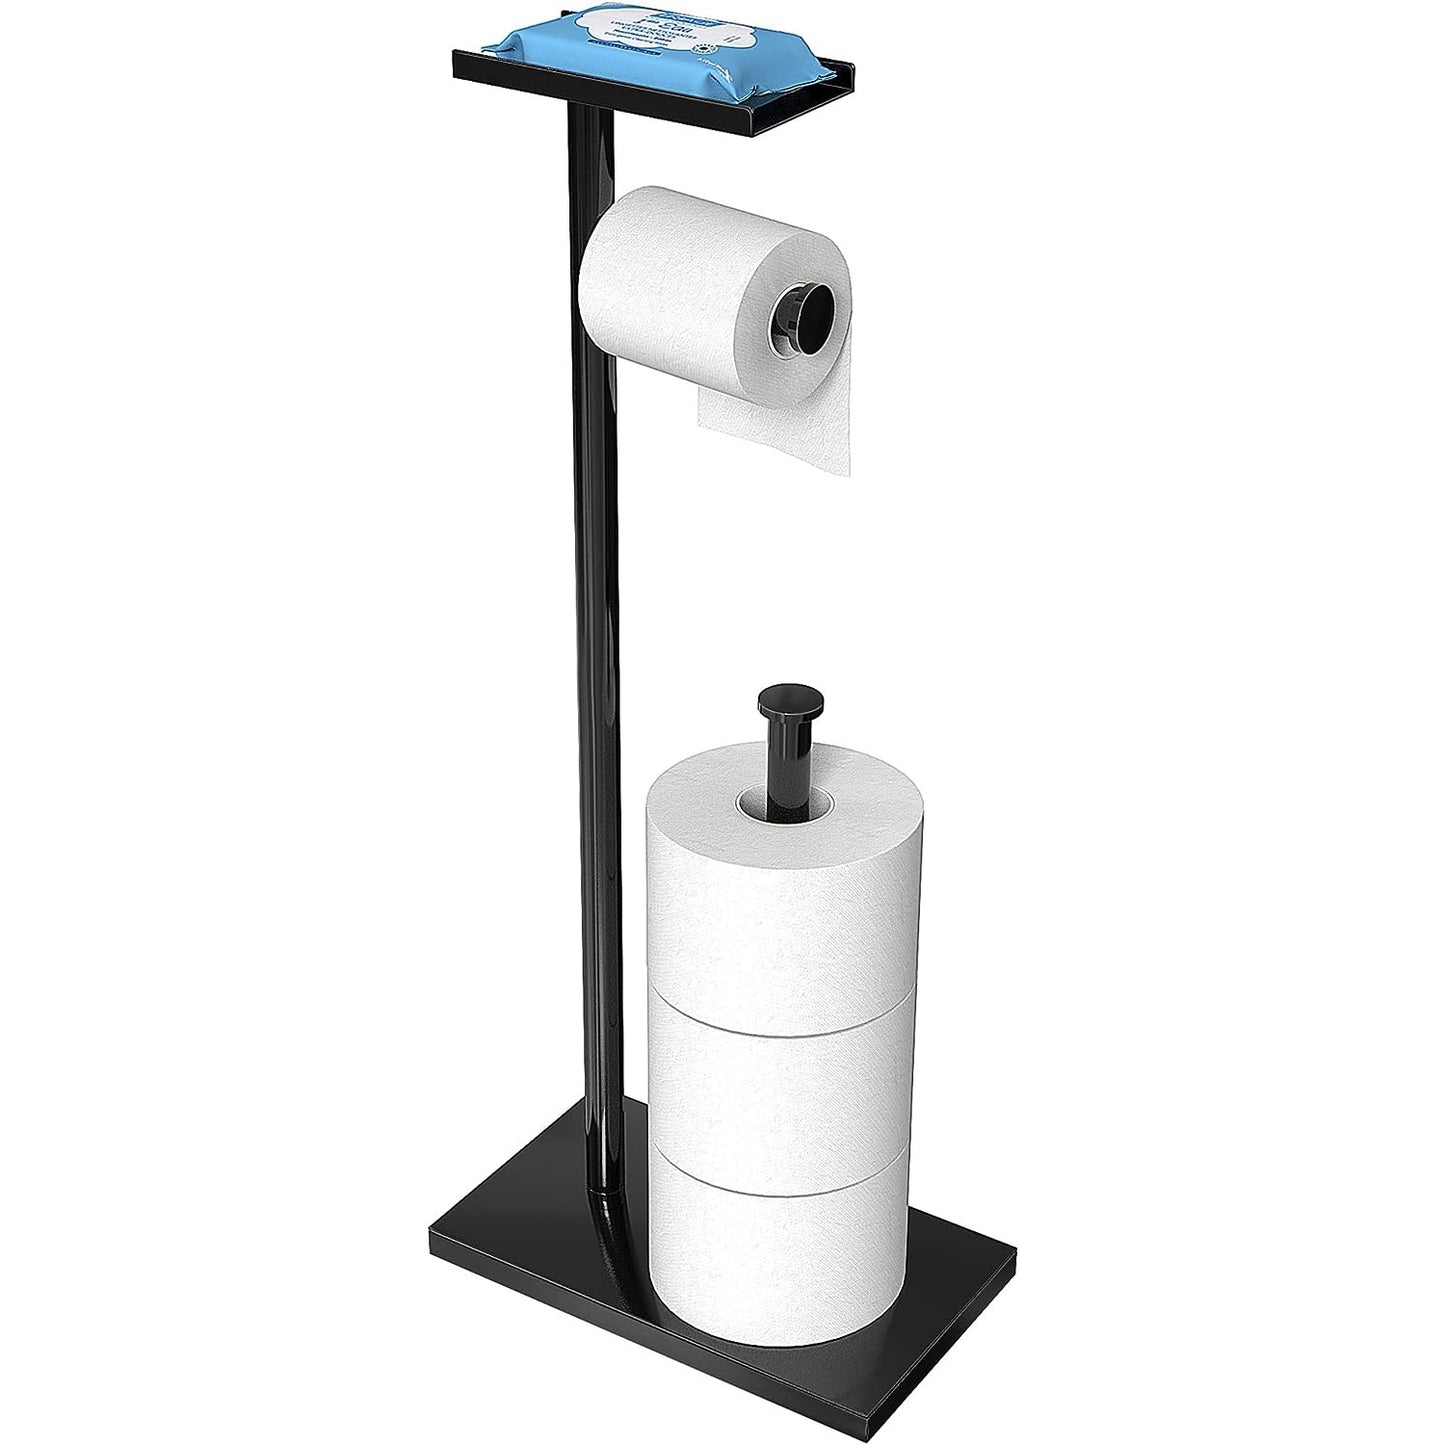 CISILY Black Toilet Paper Holder Stand with Phone Shelf: Stylish Bathroom Decor and Storage Solution - Free-Standing Tissue Paper Roll Holder with Phone Shelf for Household Essentials, RV Accessories, and Apartment Restrooms